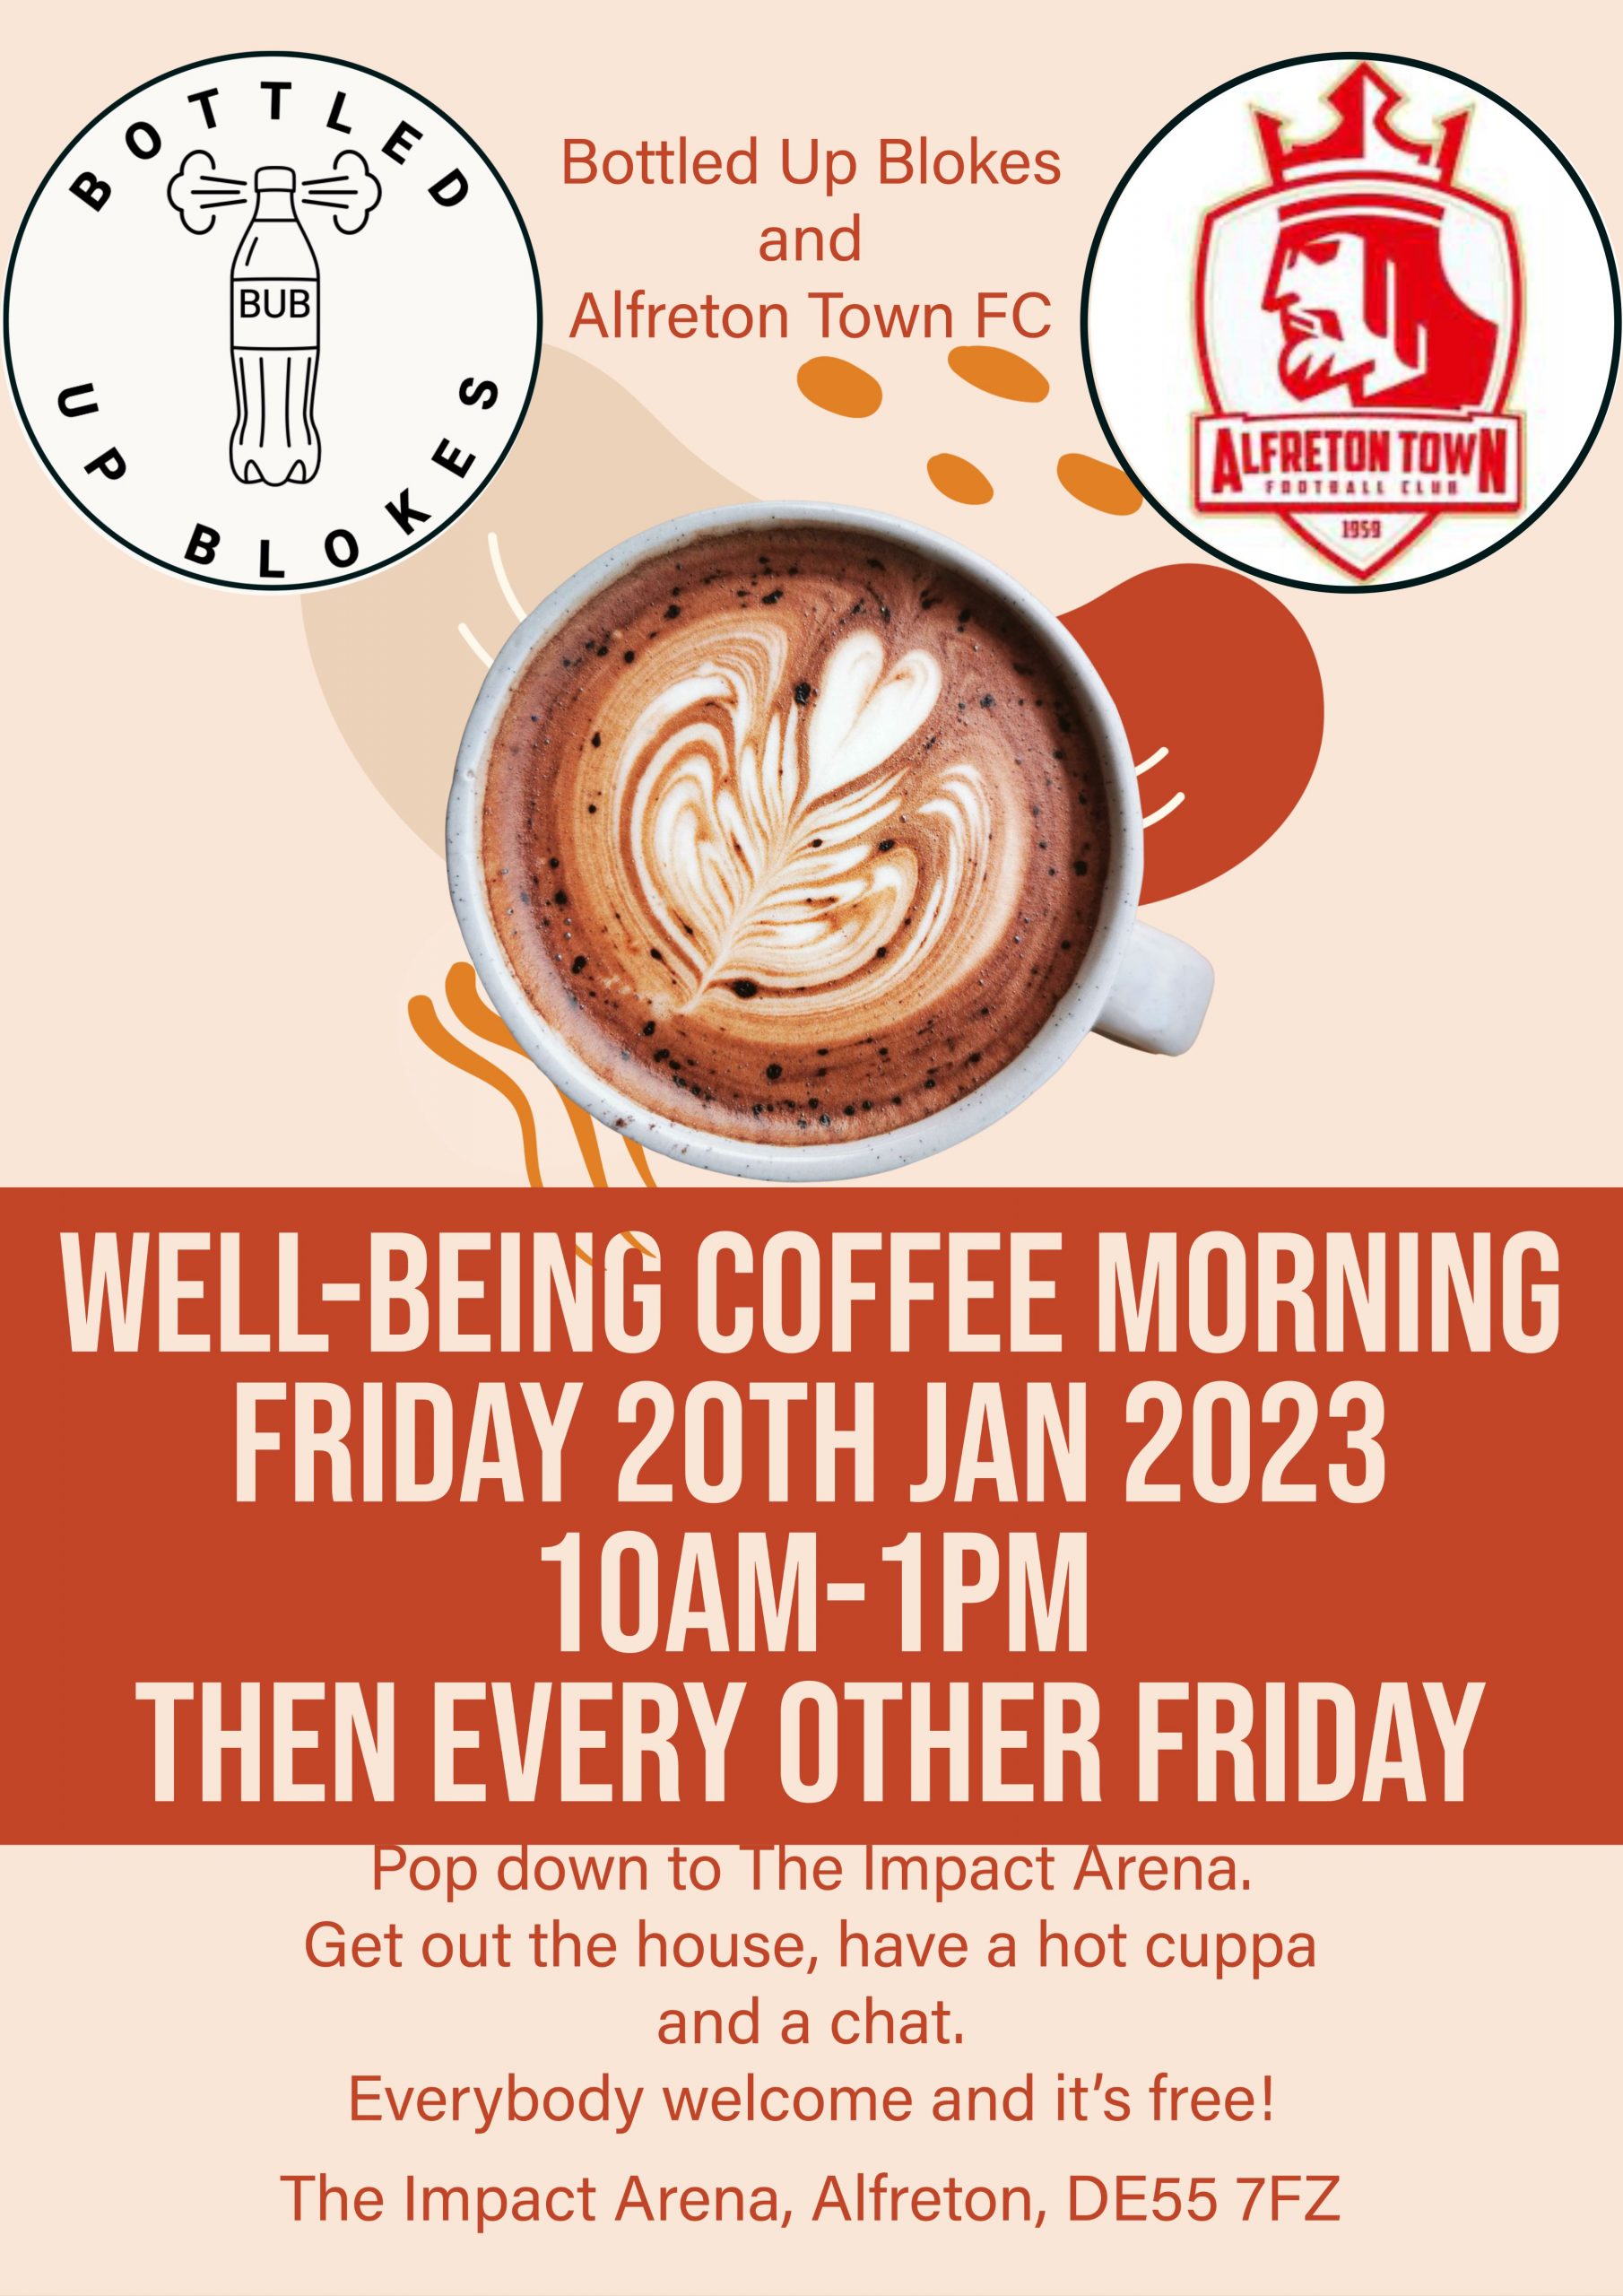 Bottled Up Blokes prepares to host first wellbeing coffee morning at Alfreton Town FC